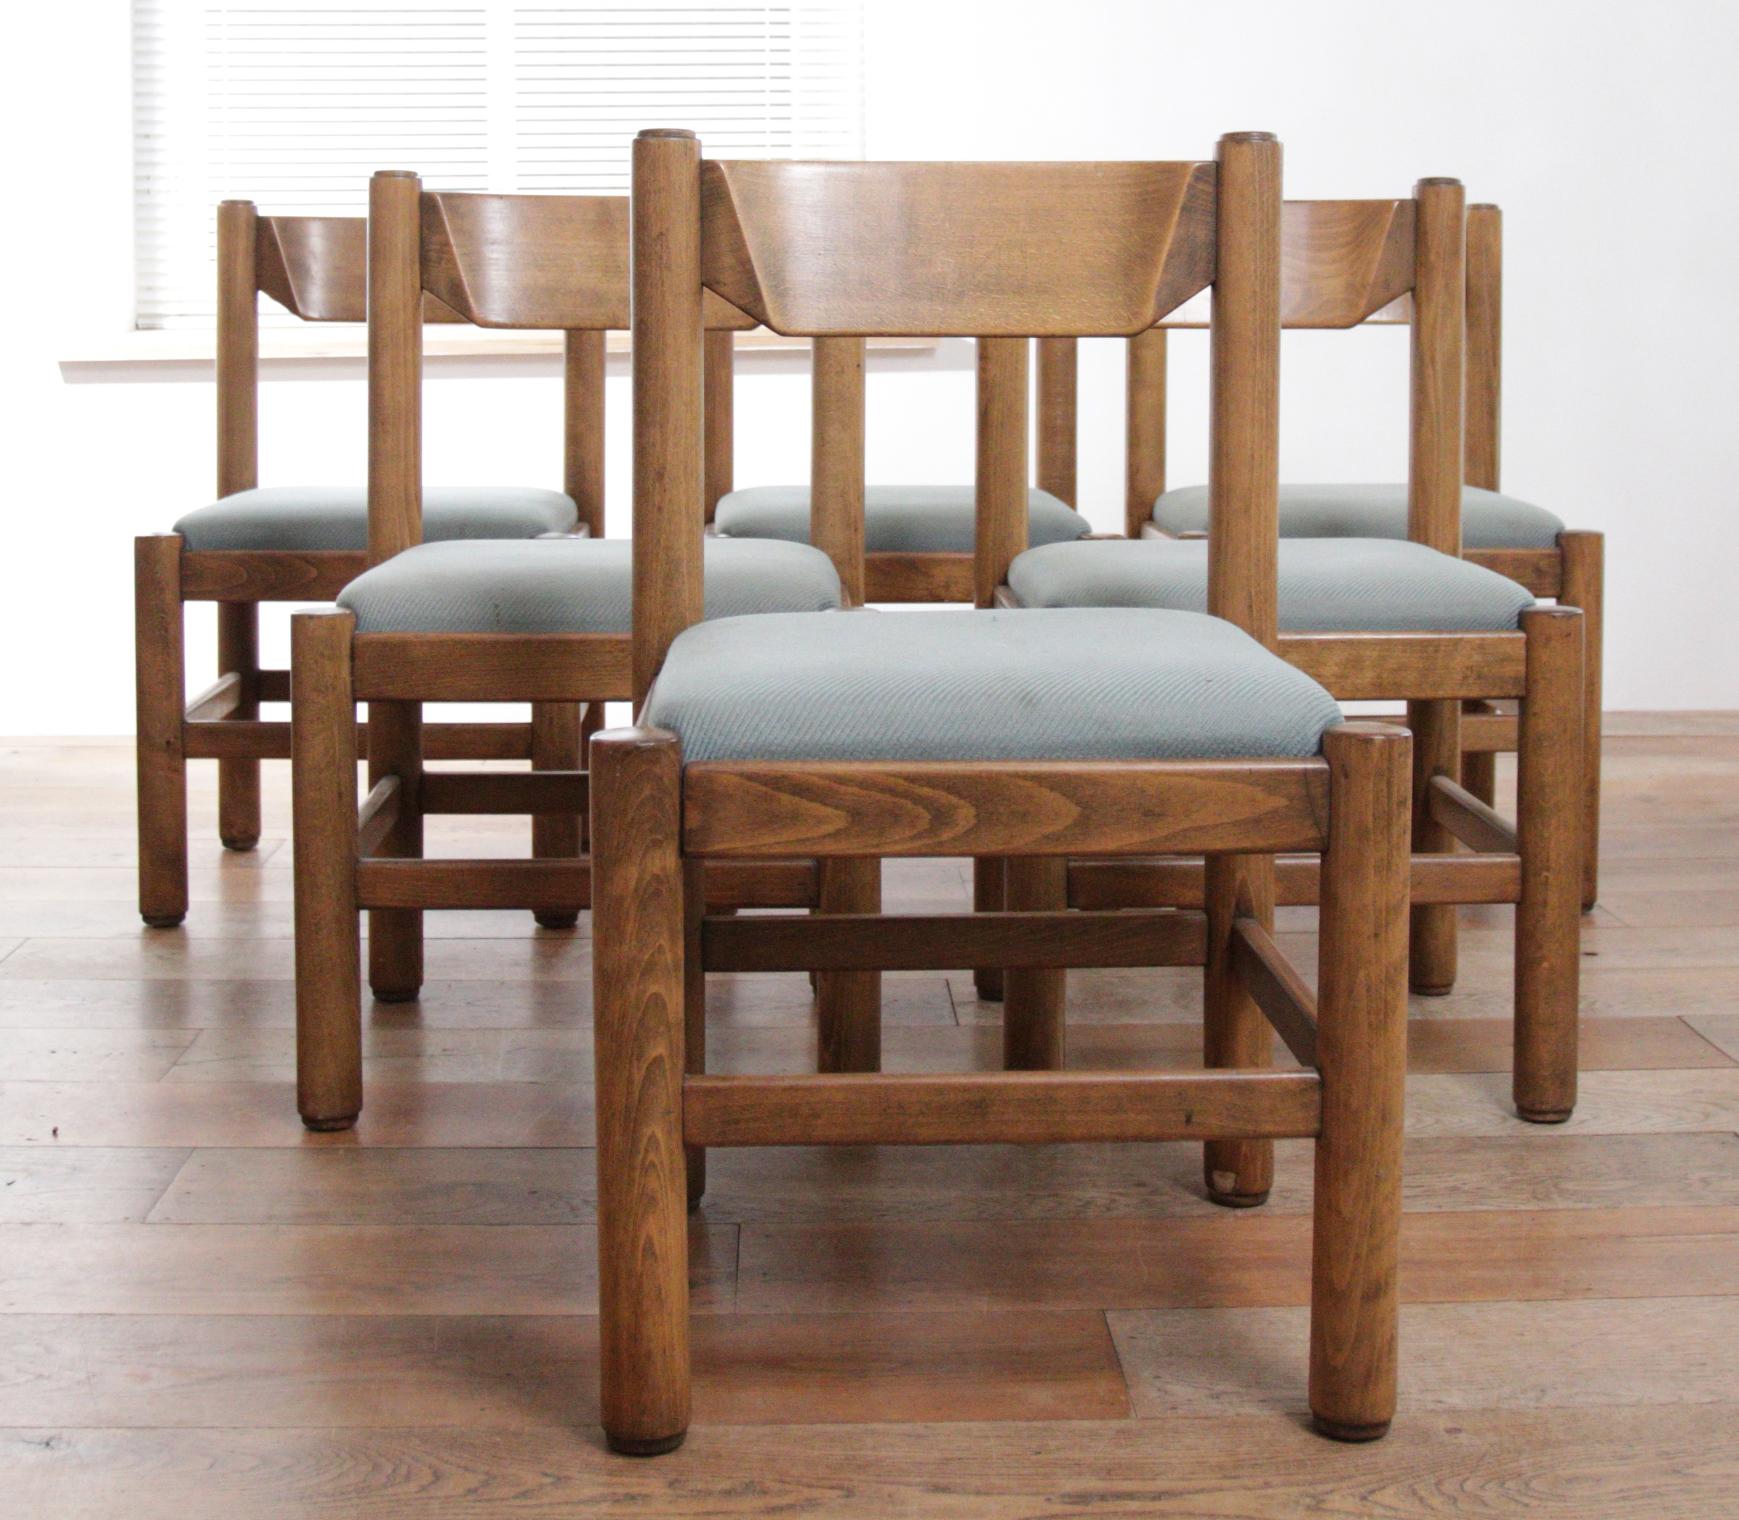 Set of 6 Vico Magistretti / Charlotte Perriand Style Dining Room Chairs 5